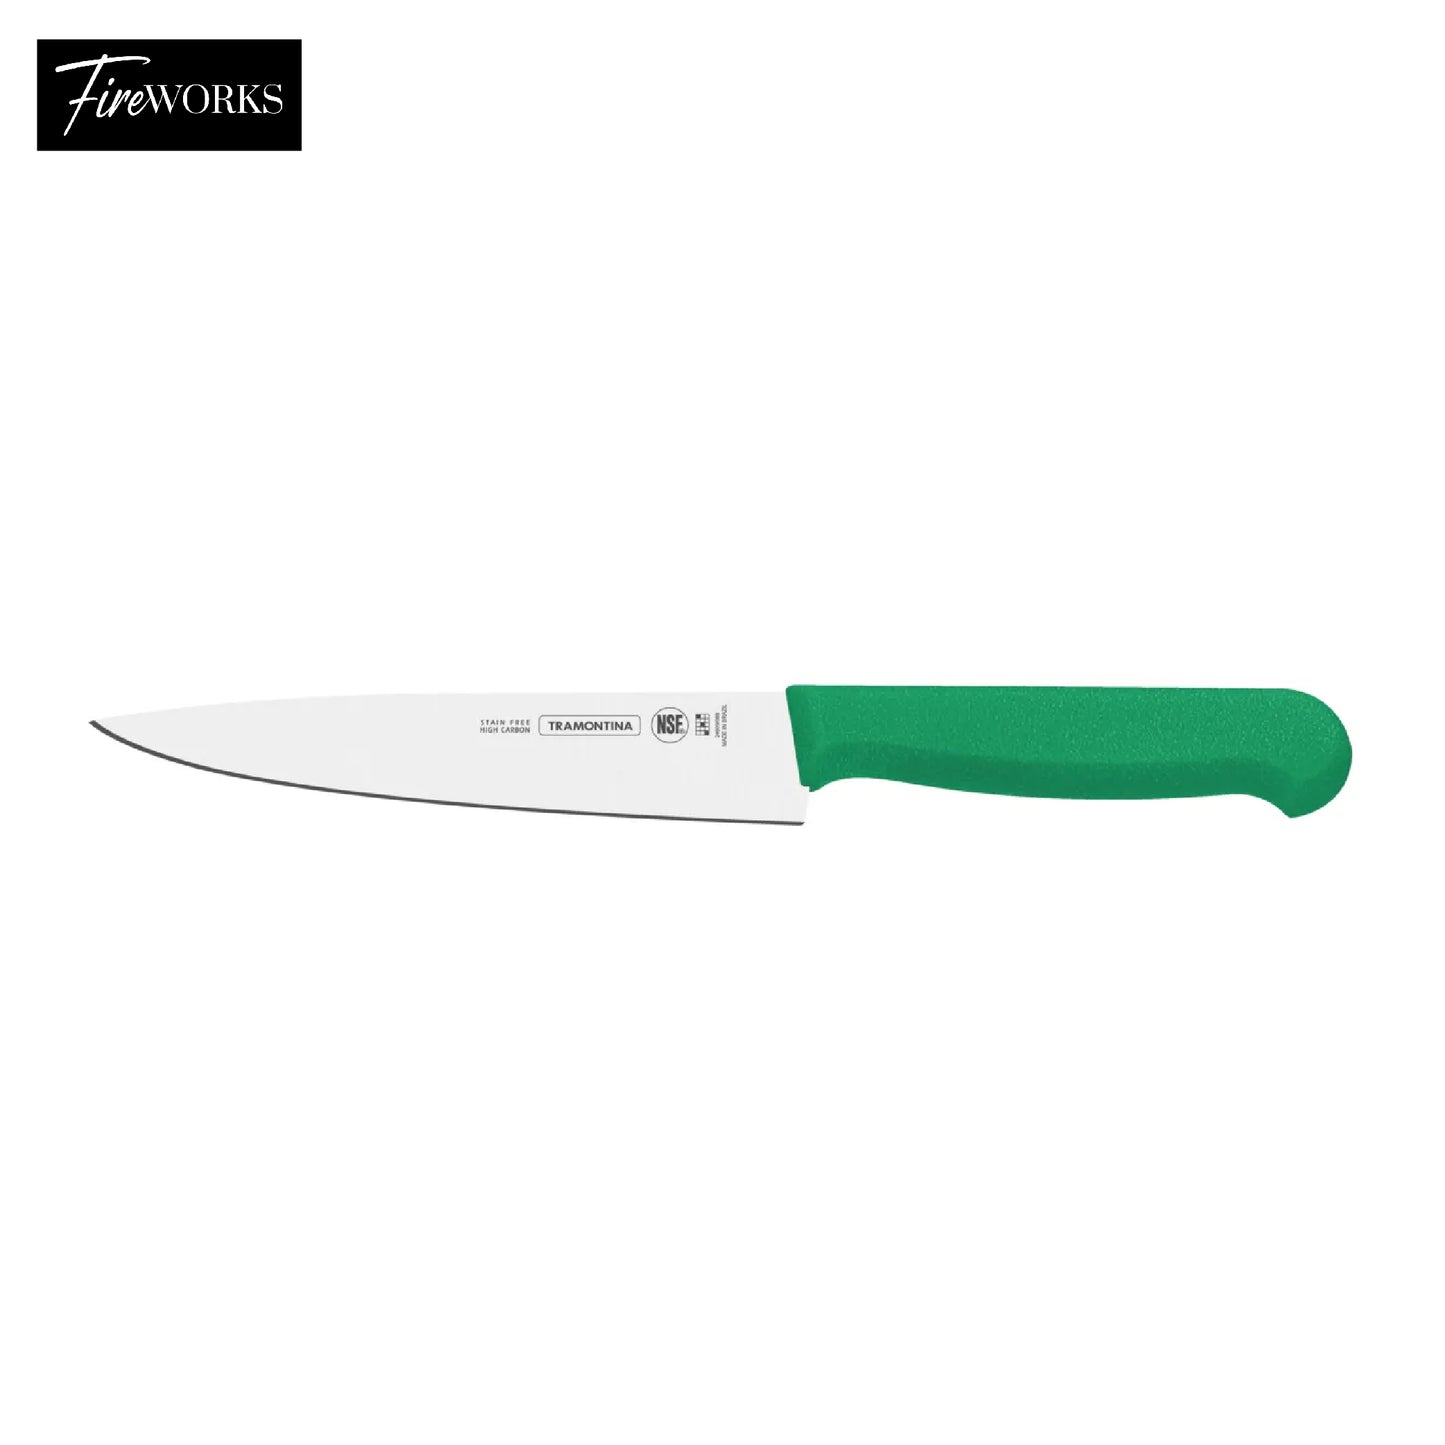 Tramontina Meat Knife 10 Inches Green Colour - 24620020